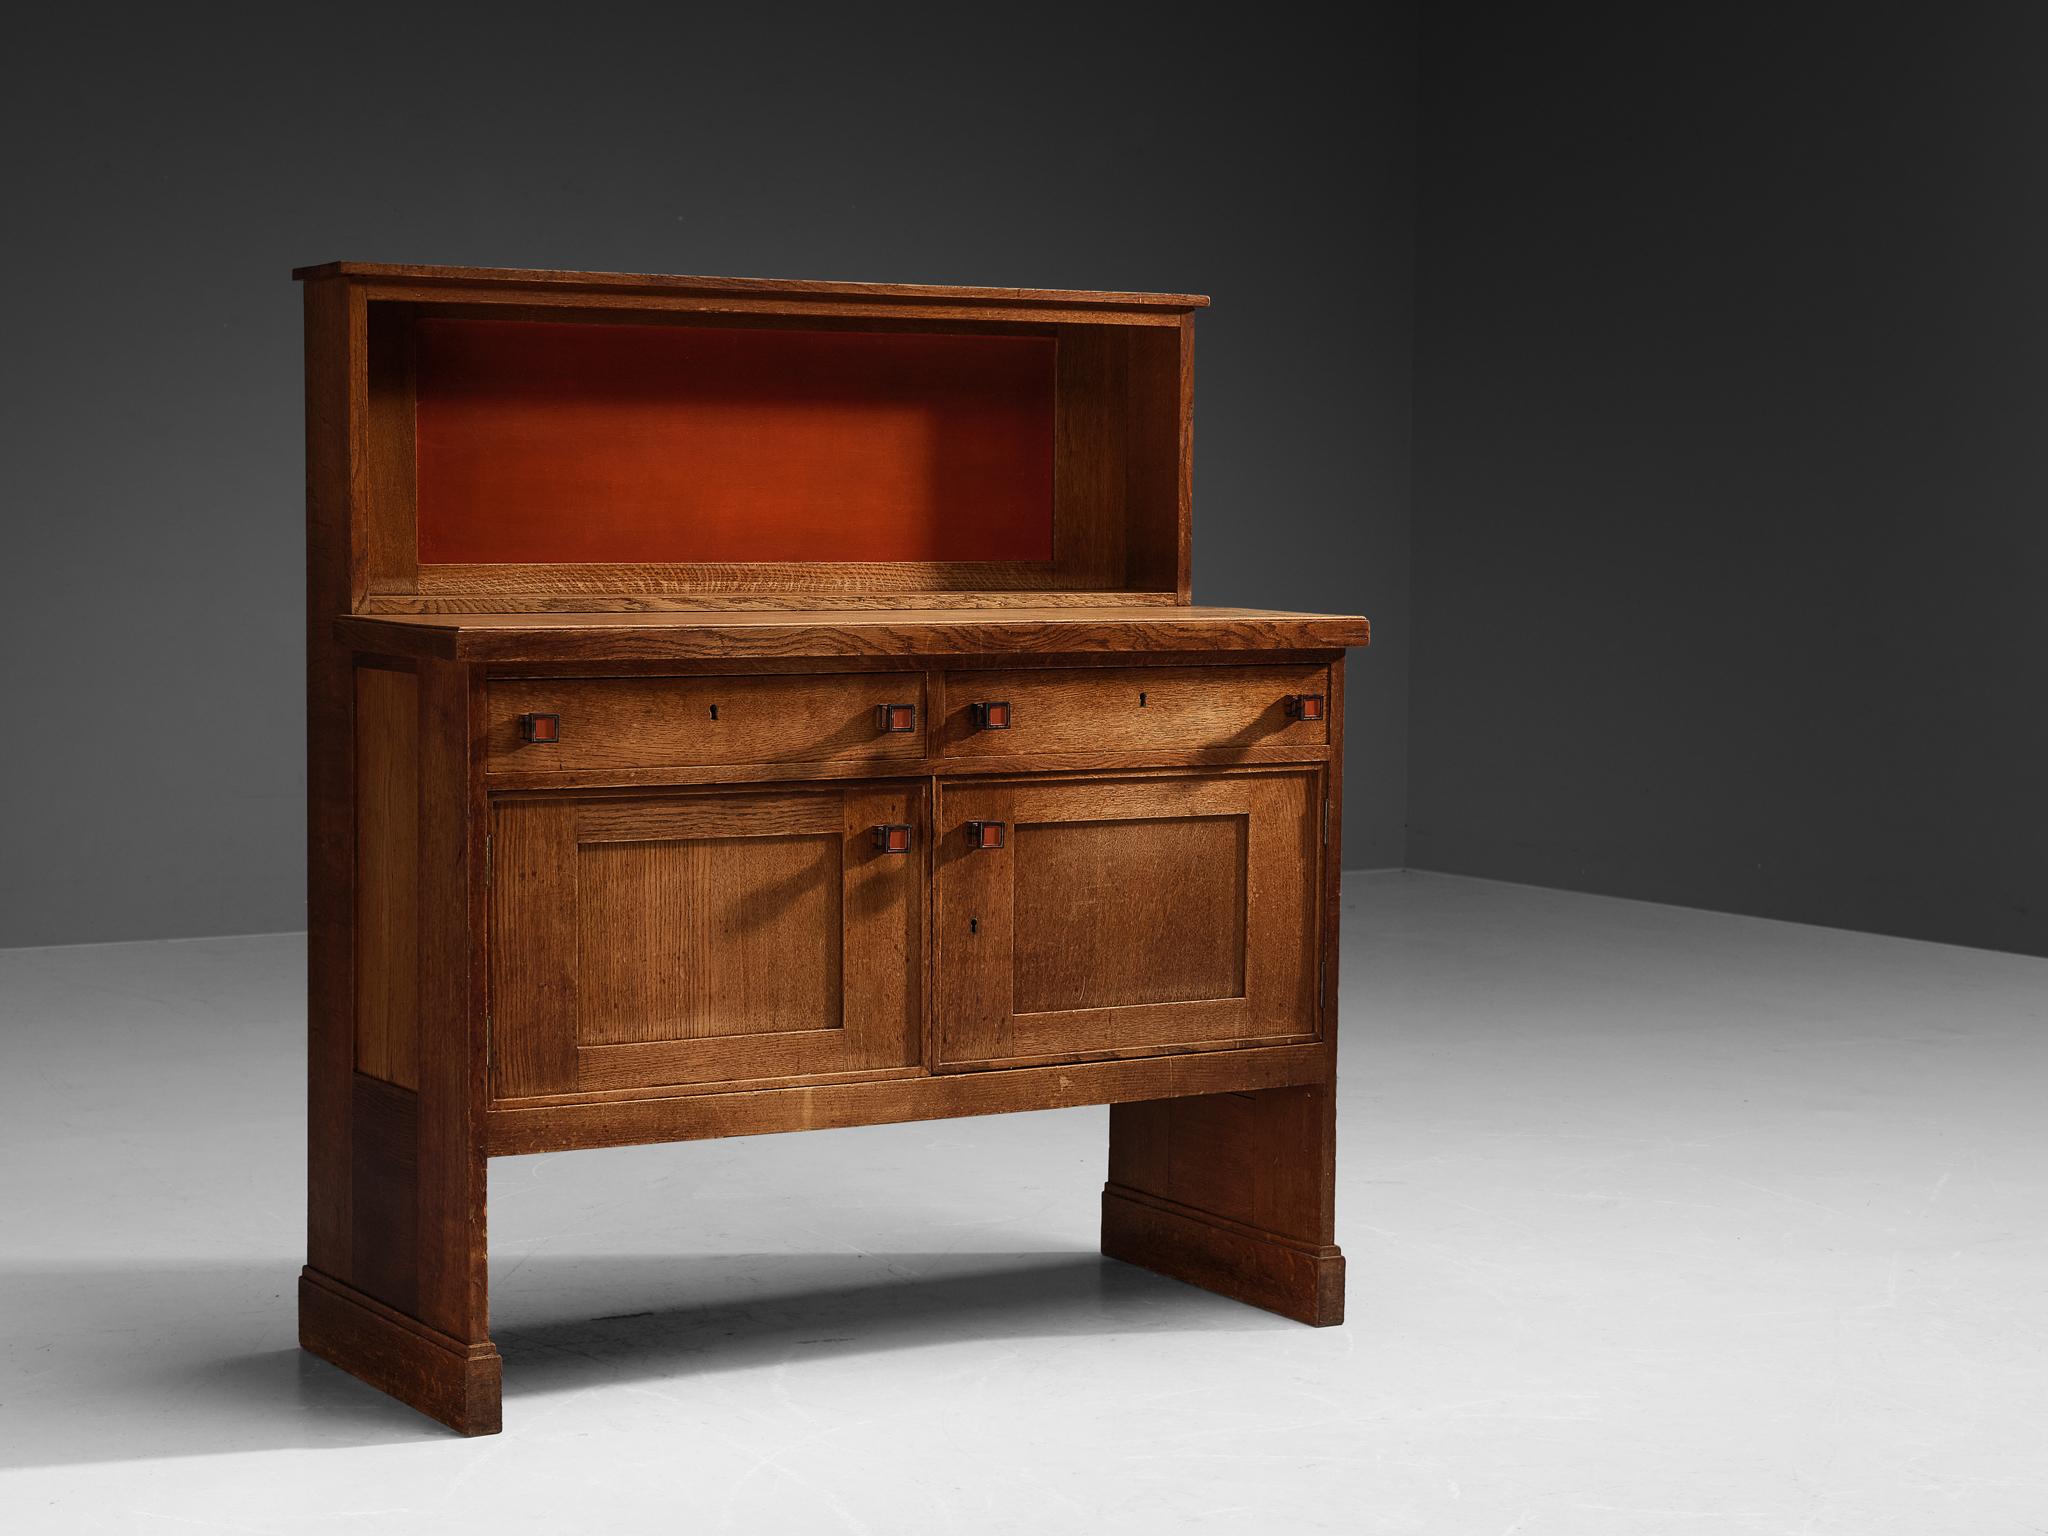 Hendrik Wouda for H. Pander & Zonen, cupboard, oak, coromandel, lacquered wood, The Netherlands, 1920s

This cabinet is designed by Hendrik Wouda and belongs to the Hague School, a movement that emphasized geometric shapes, simple proportions and